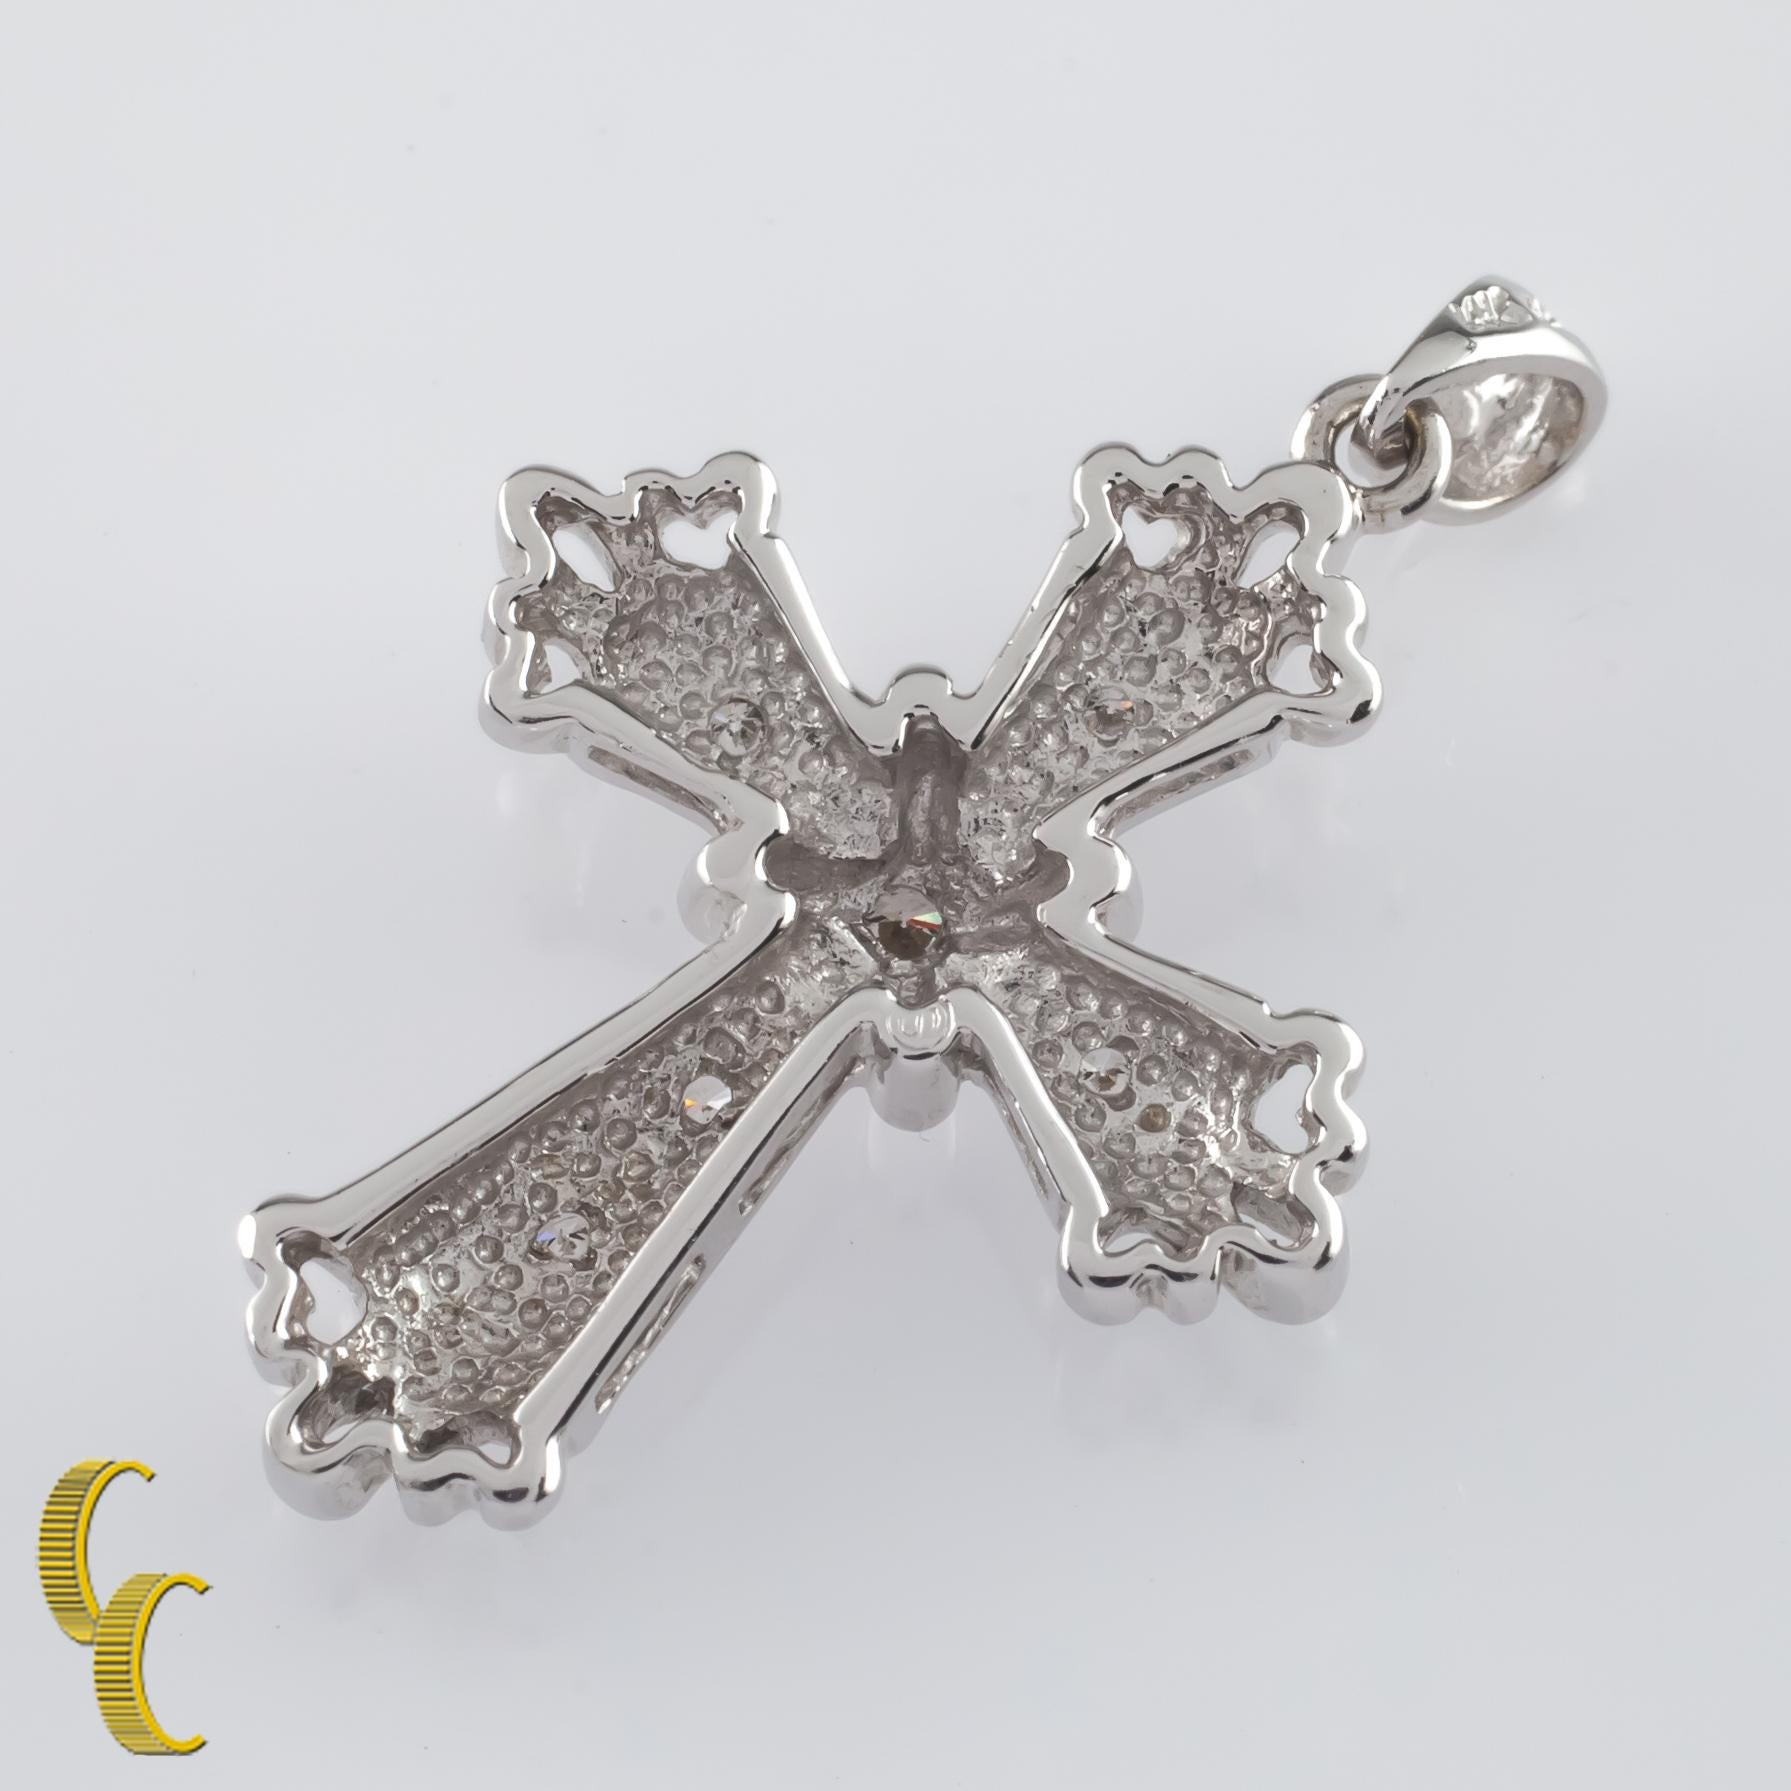 Gorgeous Matte 14k White Gold Cross
Features 6 Flush-set round diamonds
TDW = 0.15 ct
30 mm long
19 mm wide
Total Mass = 3.2 grams
Gorgeous gift!